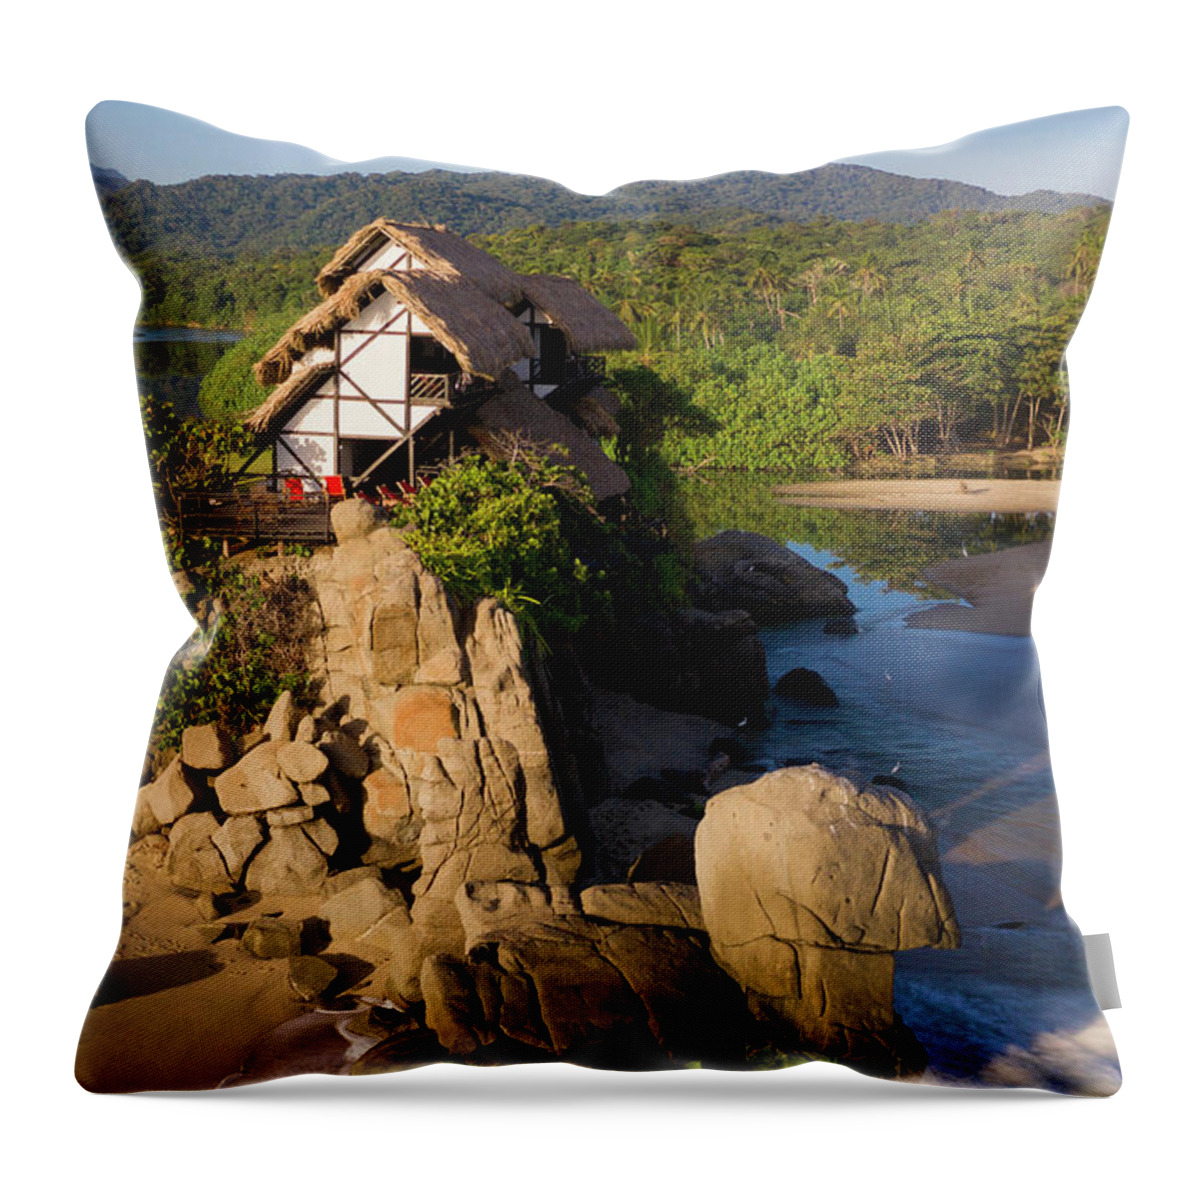 Los Naranjos Throw Pillow featuring the photograph Los Naranjos Magdalena Colombia #7 by Tristan Quevilly